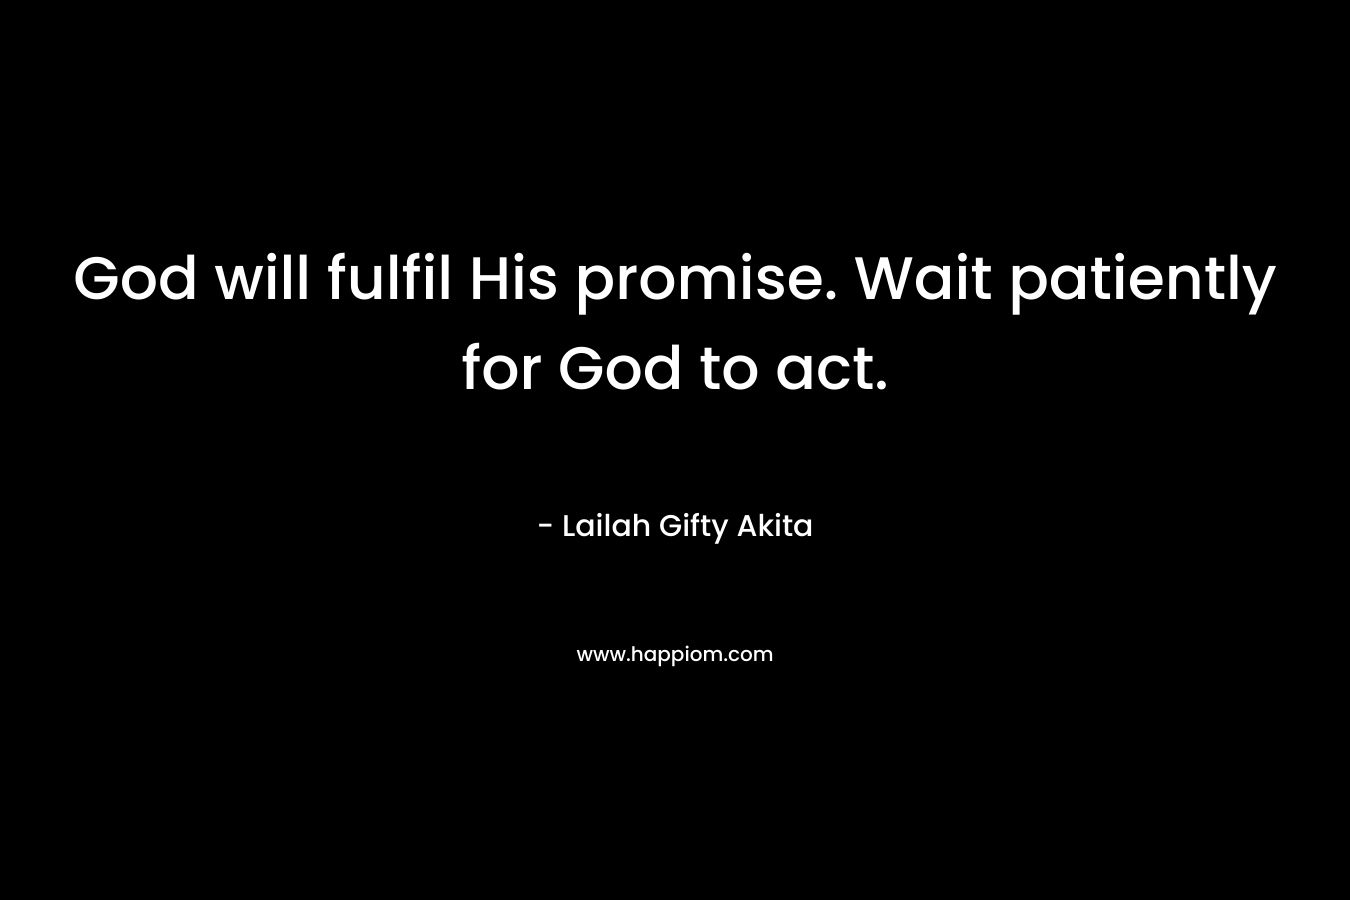 God will fulfil His promise. Wait patiently for God to act.